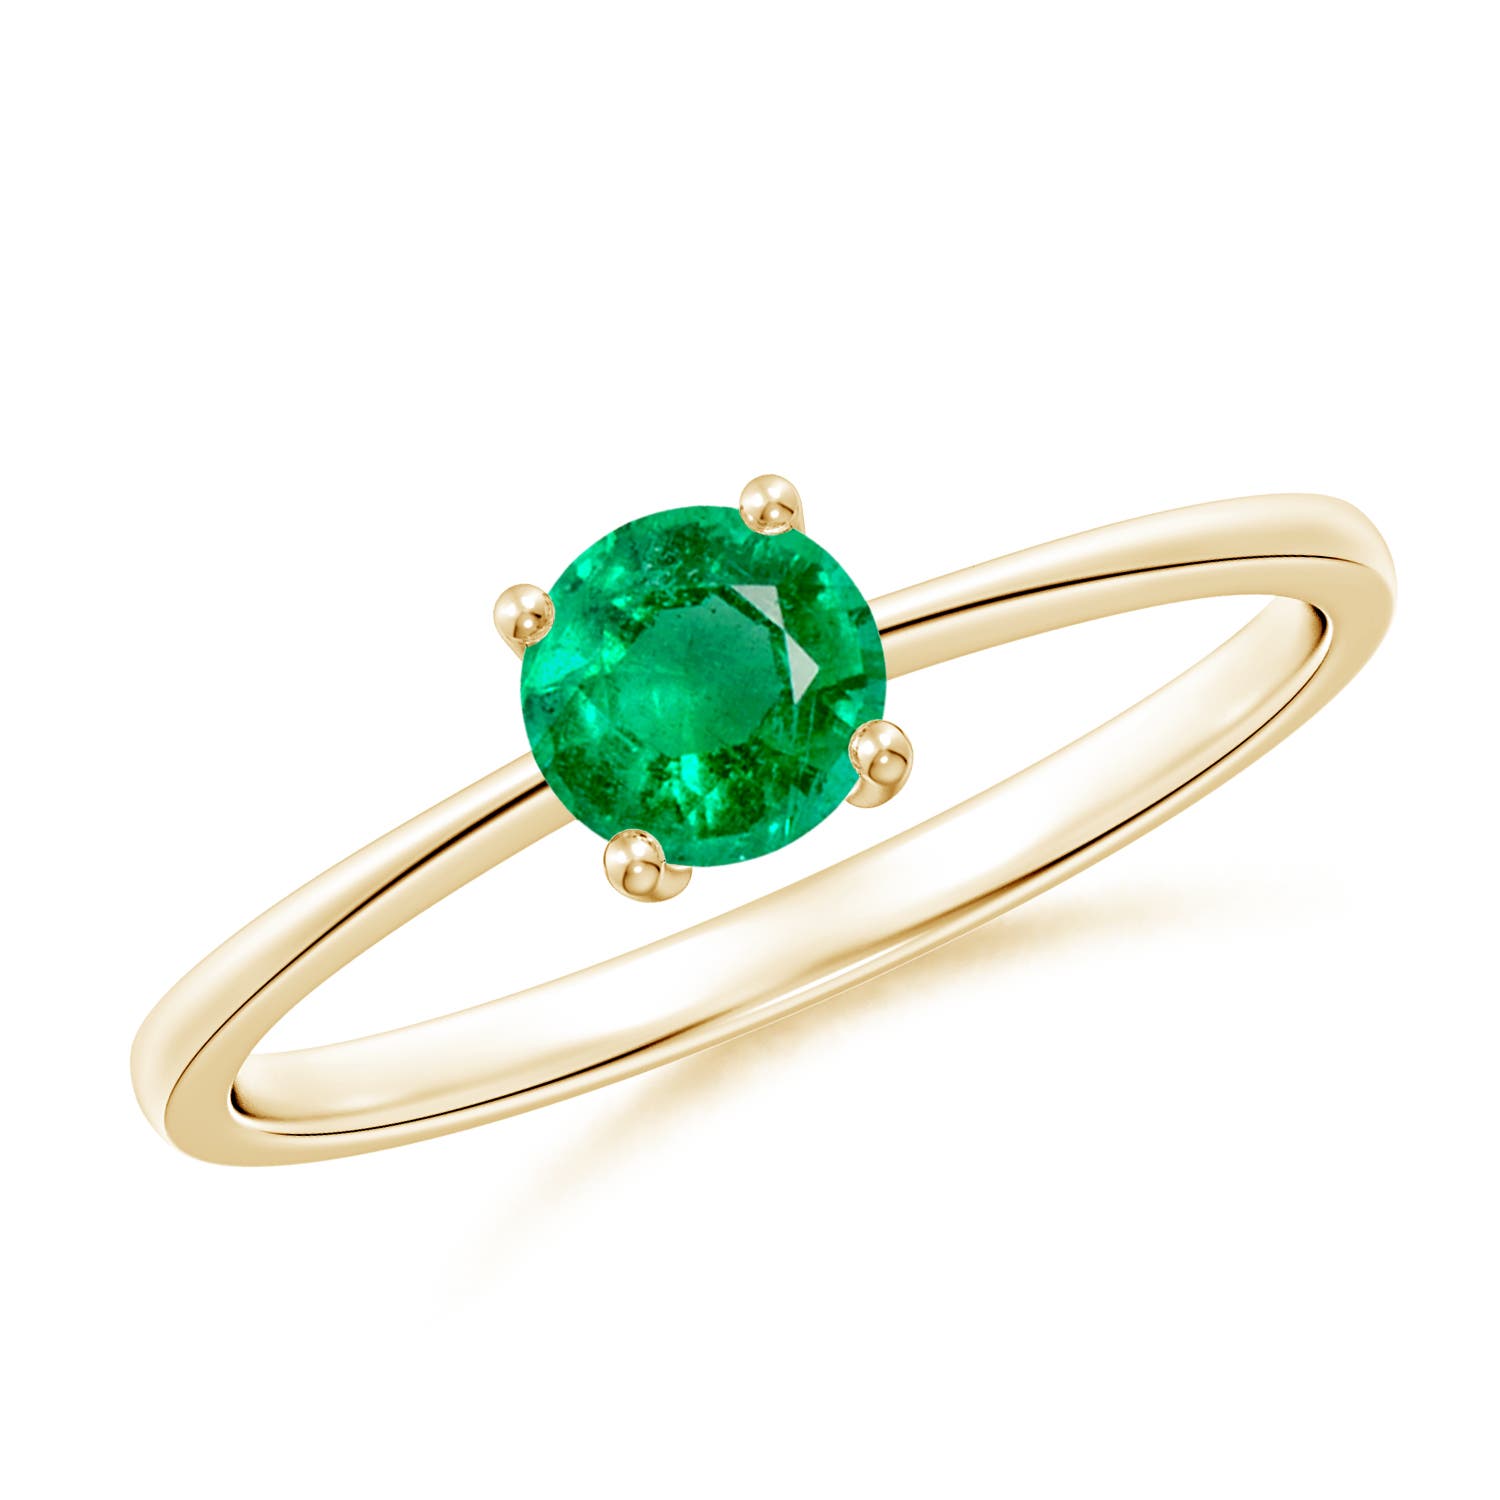 AAA - Emerald / 0.45 CT / 14 KT Yellow Gold